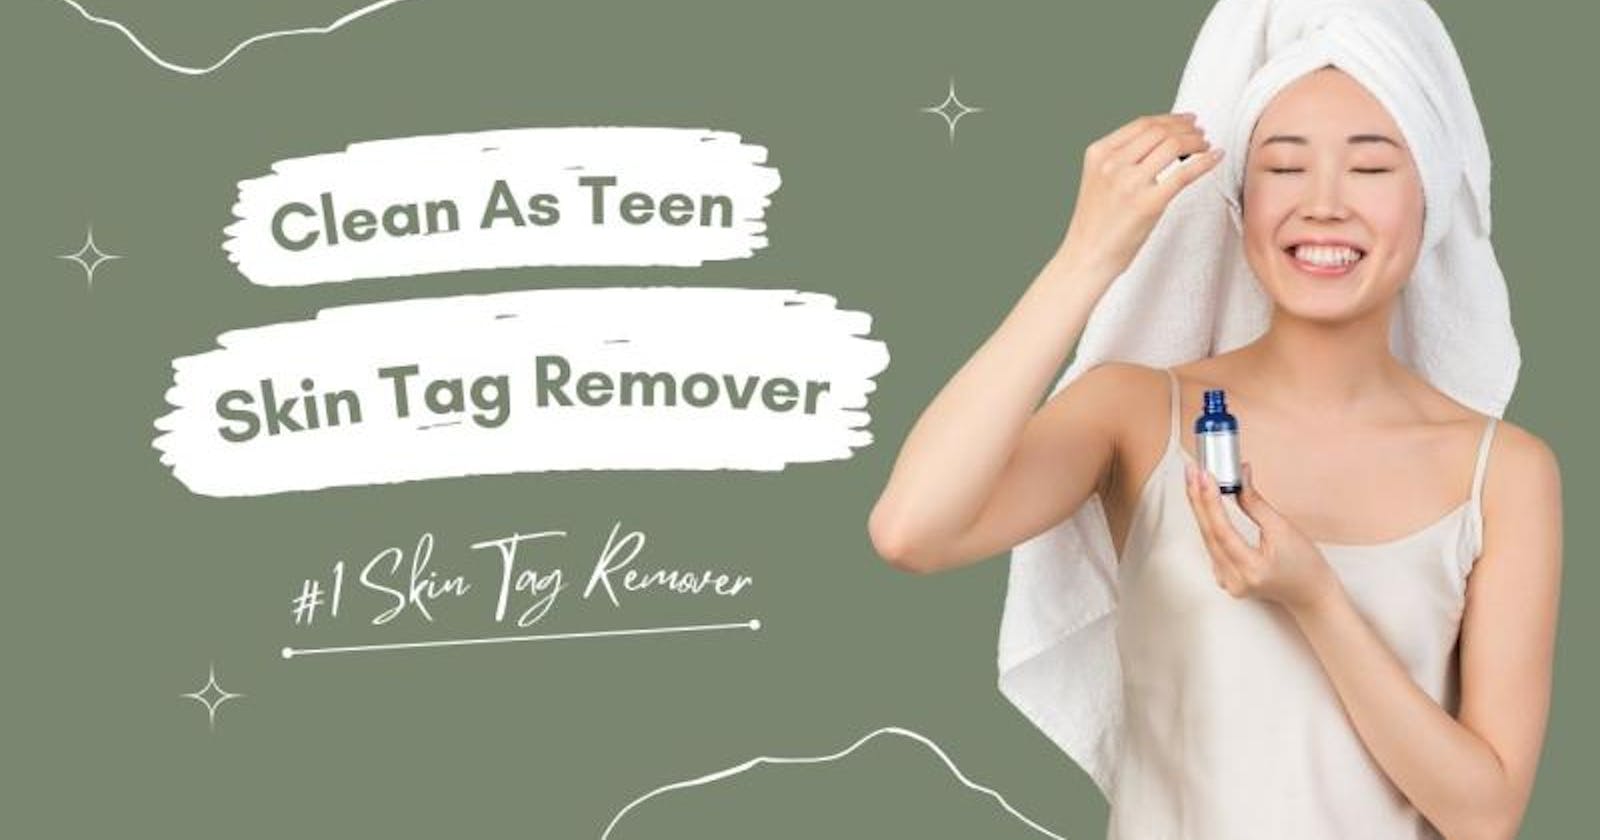 Clean As Teen Skin Tag Remover: Review Benefits, Side-effects